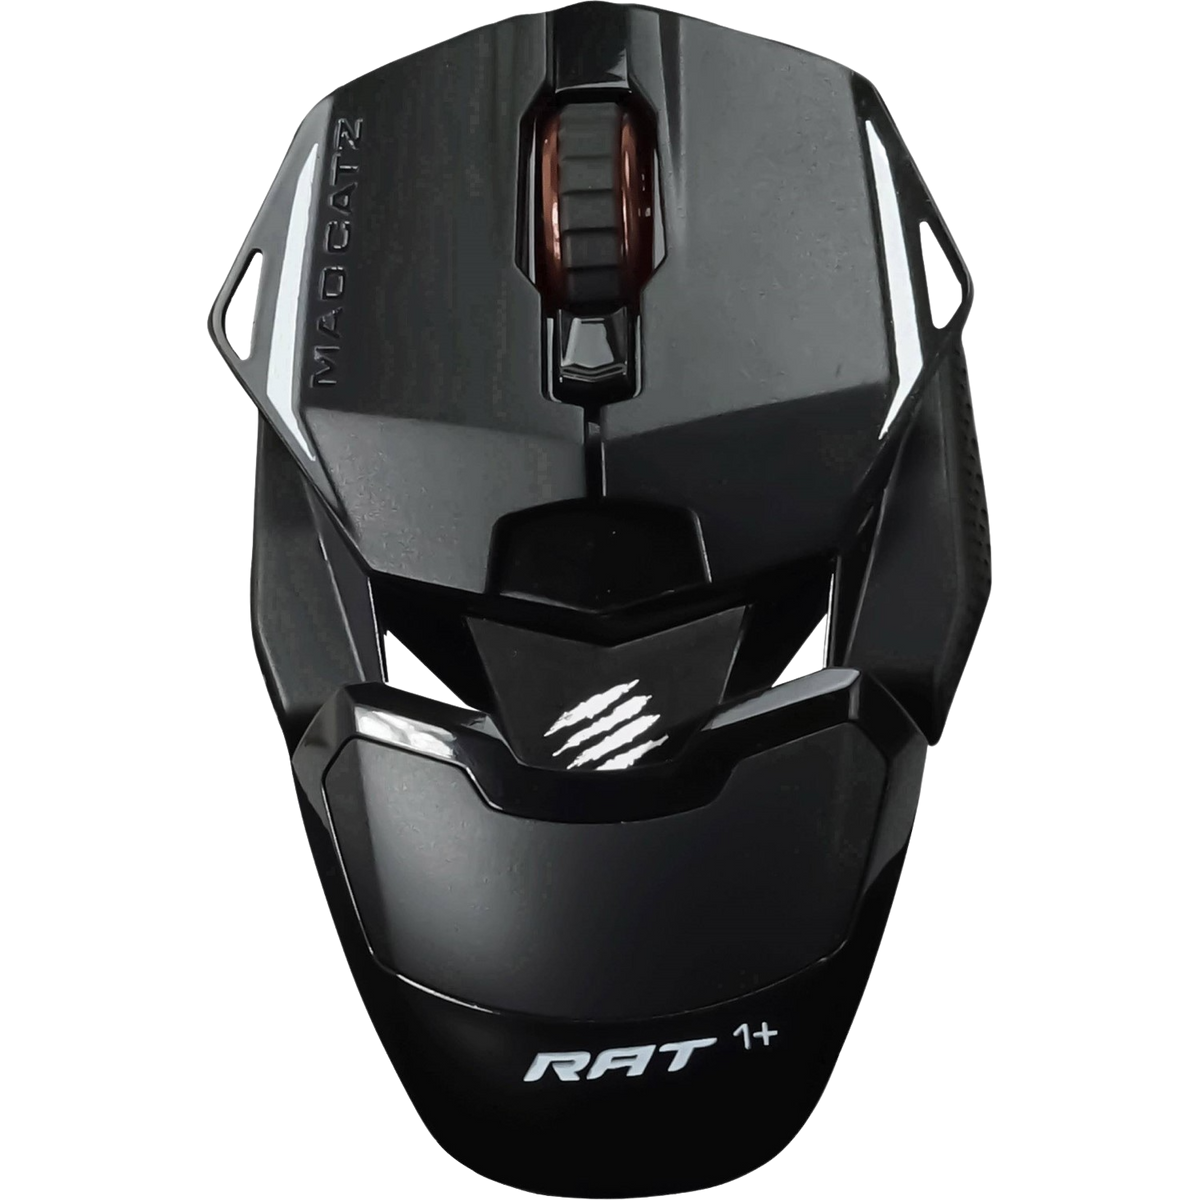 MAD CATZ R.A.T. Gaming Schwarz MOUSE, GAMING BL 1+ Maus, MR01MCINBL000-0 OPTICAL